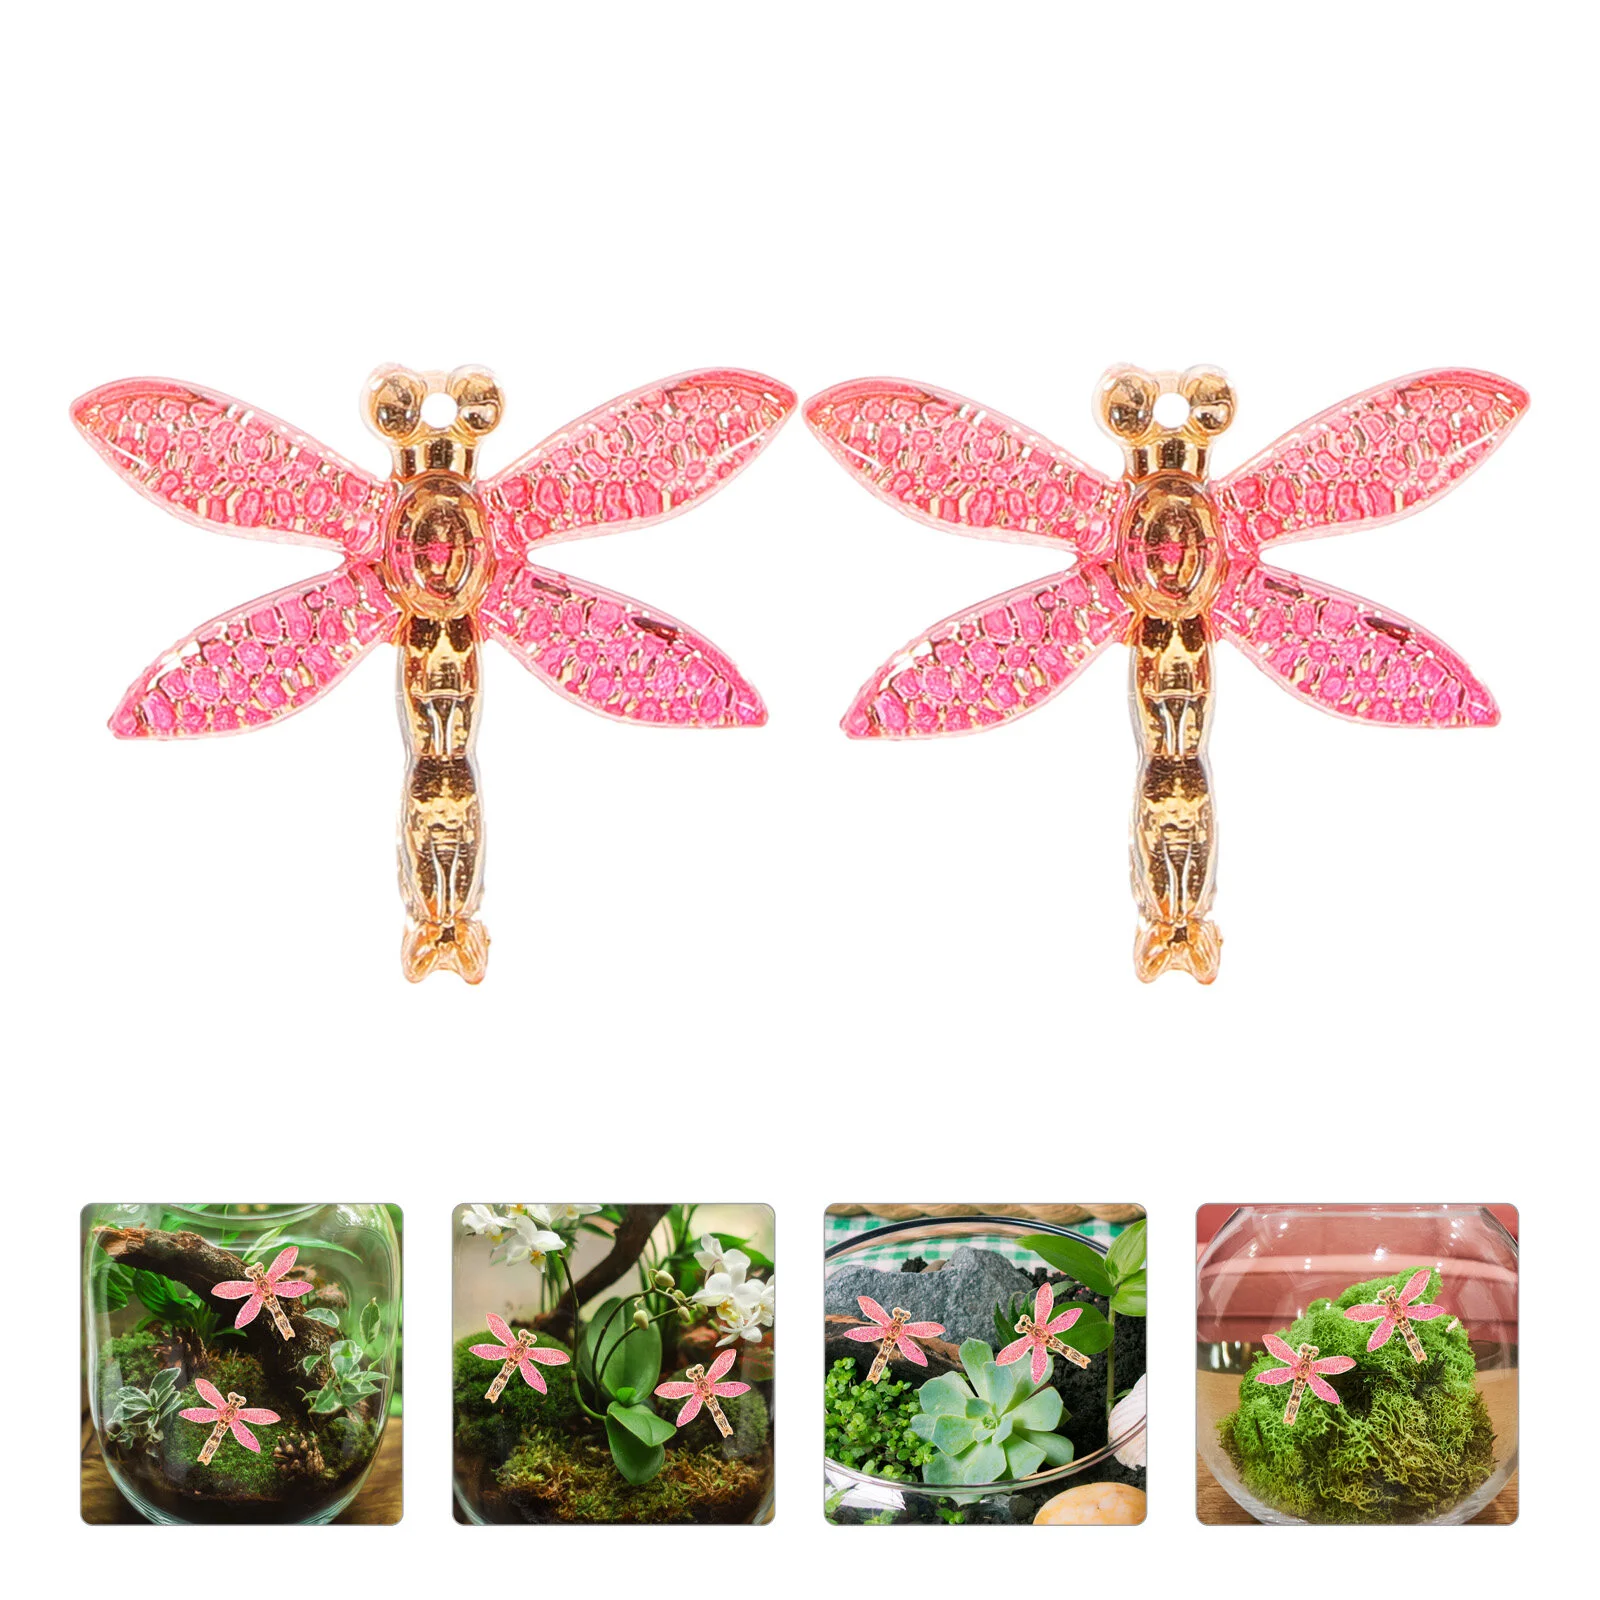 

10 Pcs Succulent Micro Landscape Potted Mini Dragonfly Charms Tiny Resin Insect Animals Embellishments Crafting Scrapbook